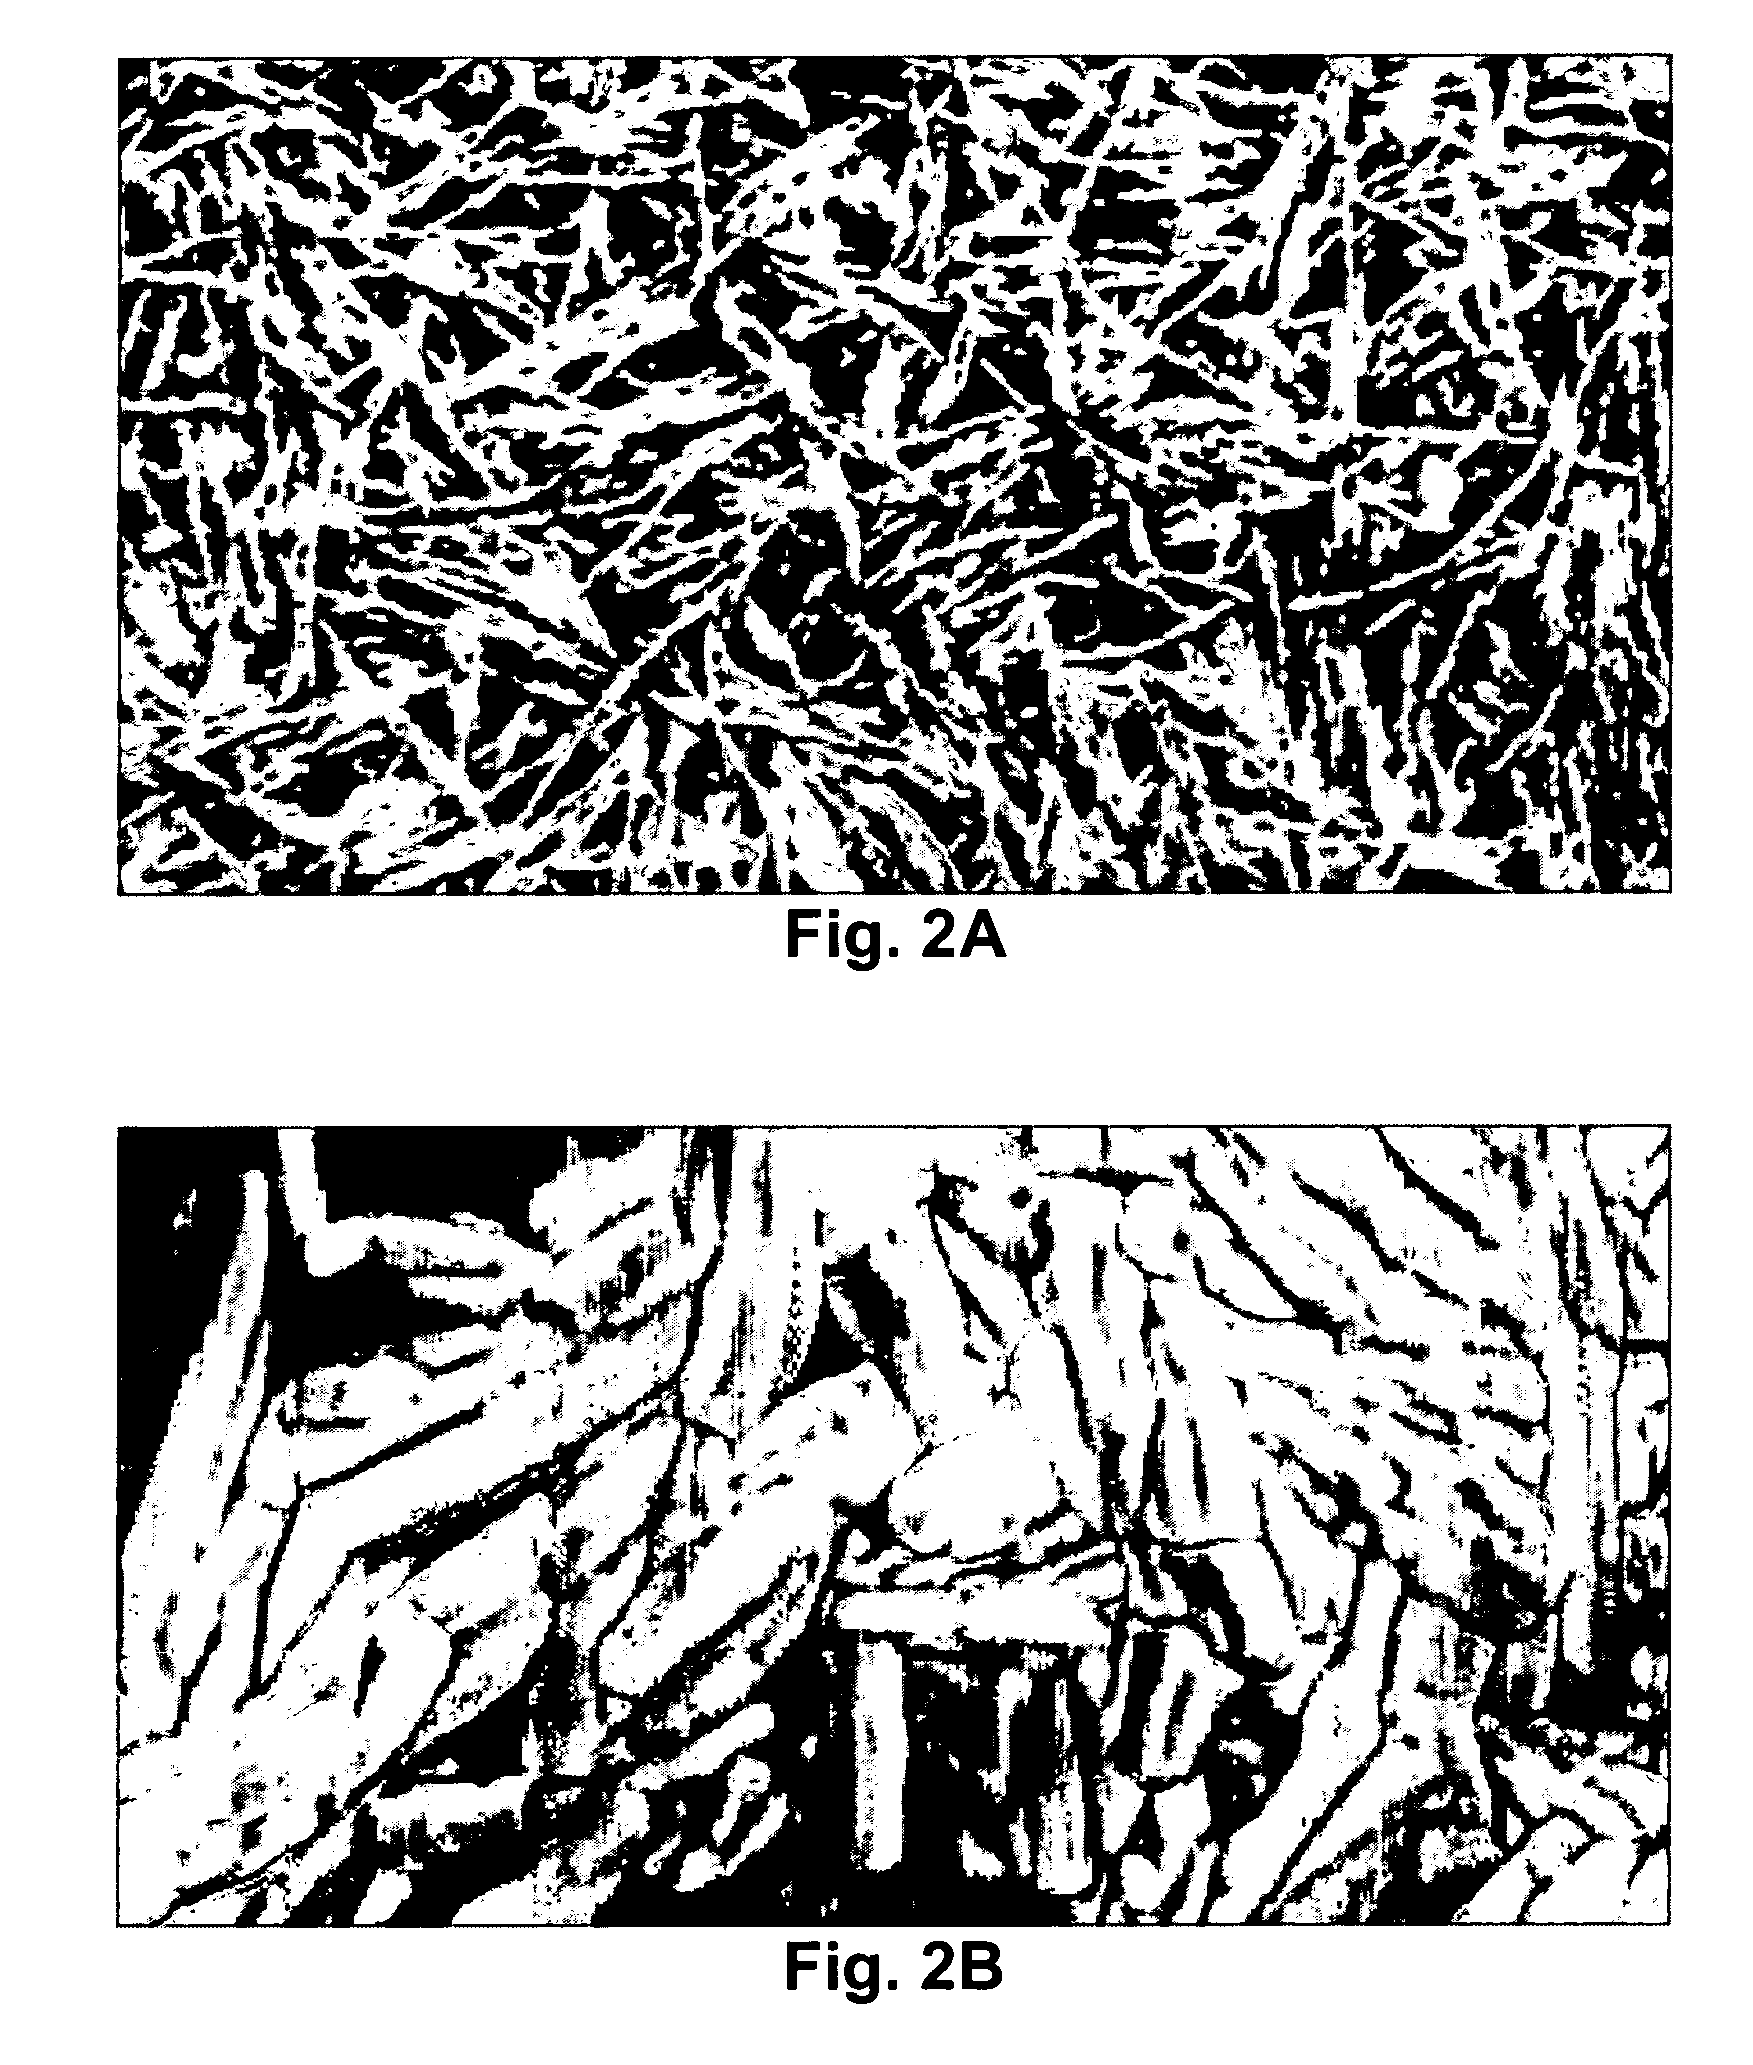 Polymeric/ceramic composite materials for use in medical devices